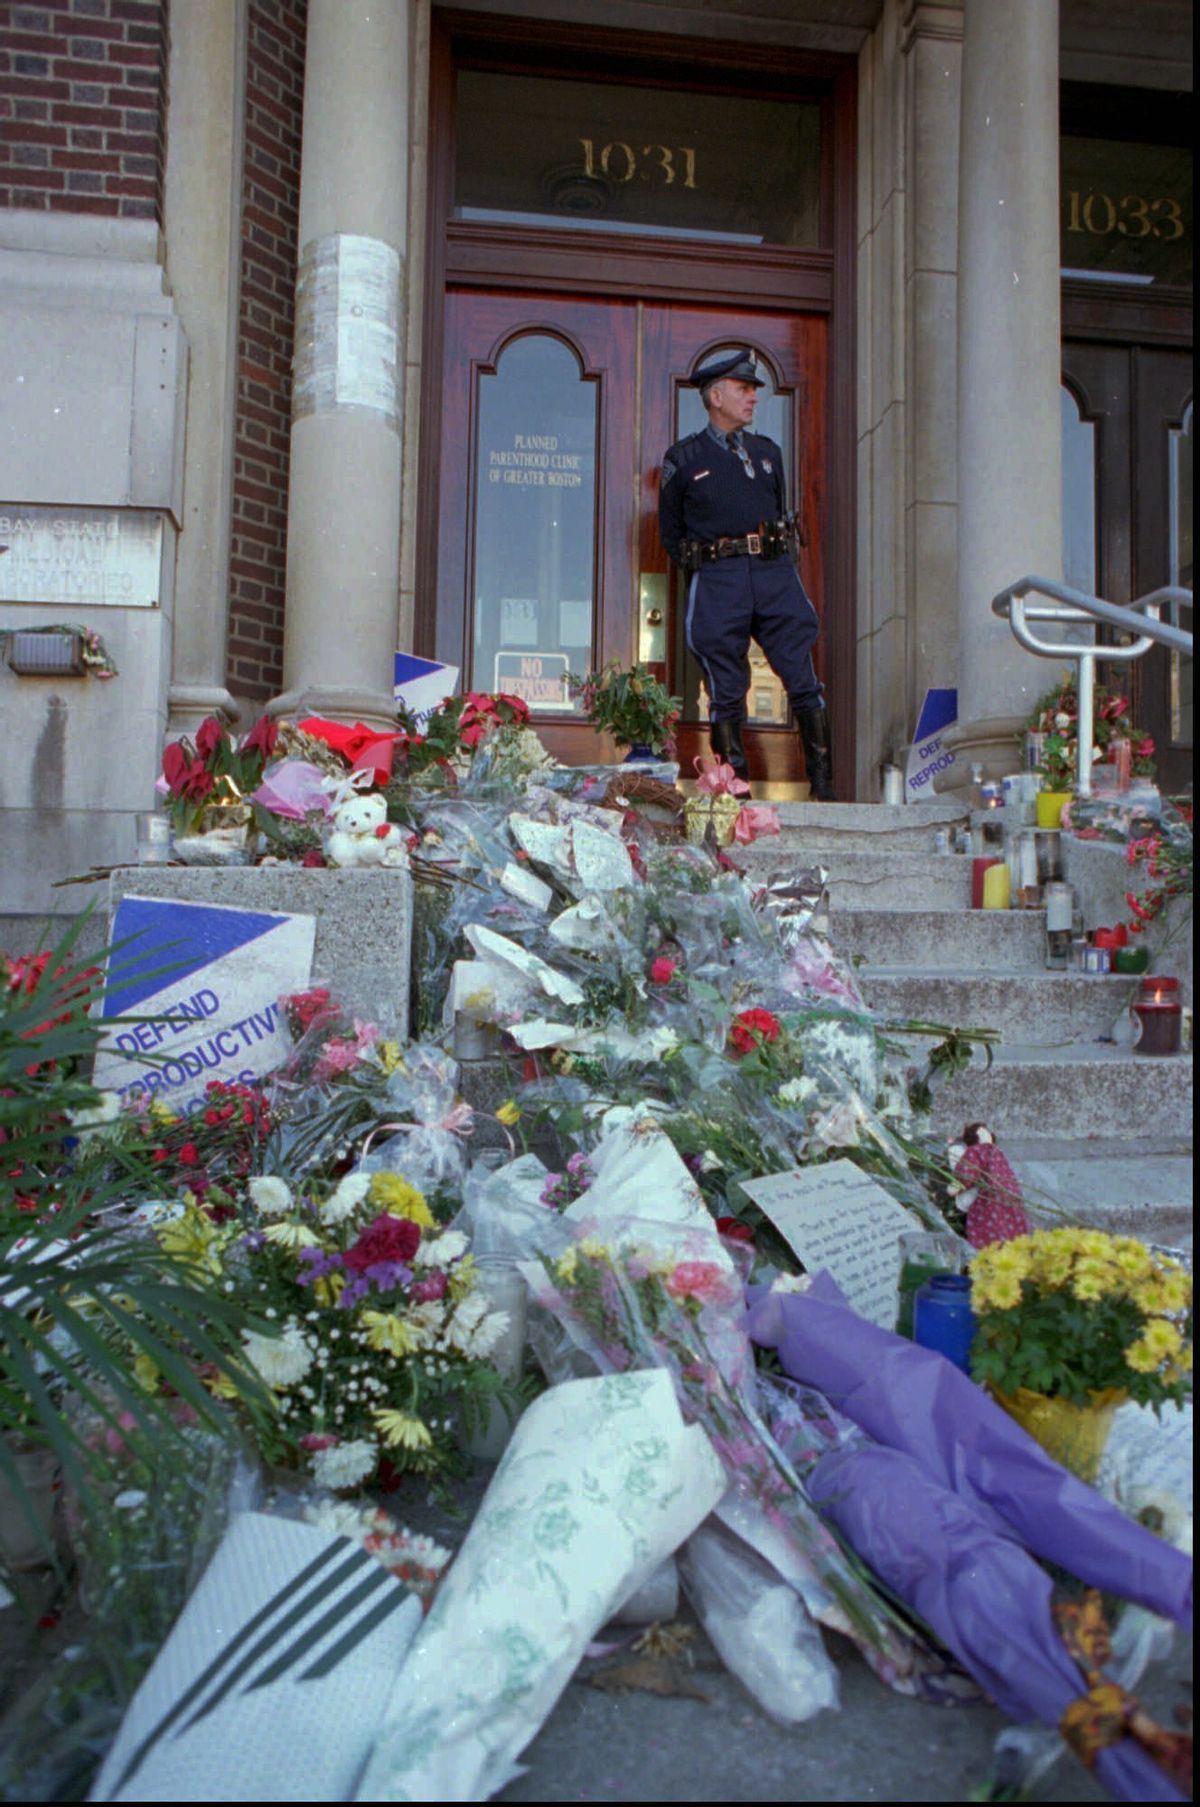 FILE - In this Wednesday, Jan. 4, 1995 file photo, Masssachusetts State Trooper Daniel Dhionis stands guard at the Planned Parenthood Clinic of Greater Boston in Brookline, Mass,, where flowers and letters were left after two women were killed, and five people injured in shootings at Planned Parenthood and another clinic. Planned Parenthood clinics have been repeated targets of bombings, arson and protests. (AP Photo/Julia Malakie) (AP)